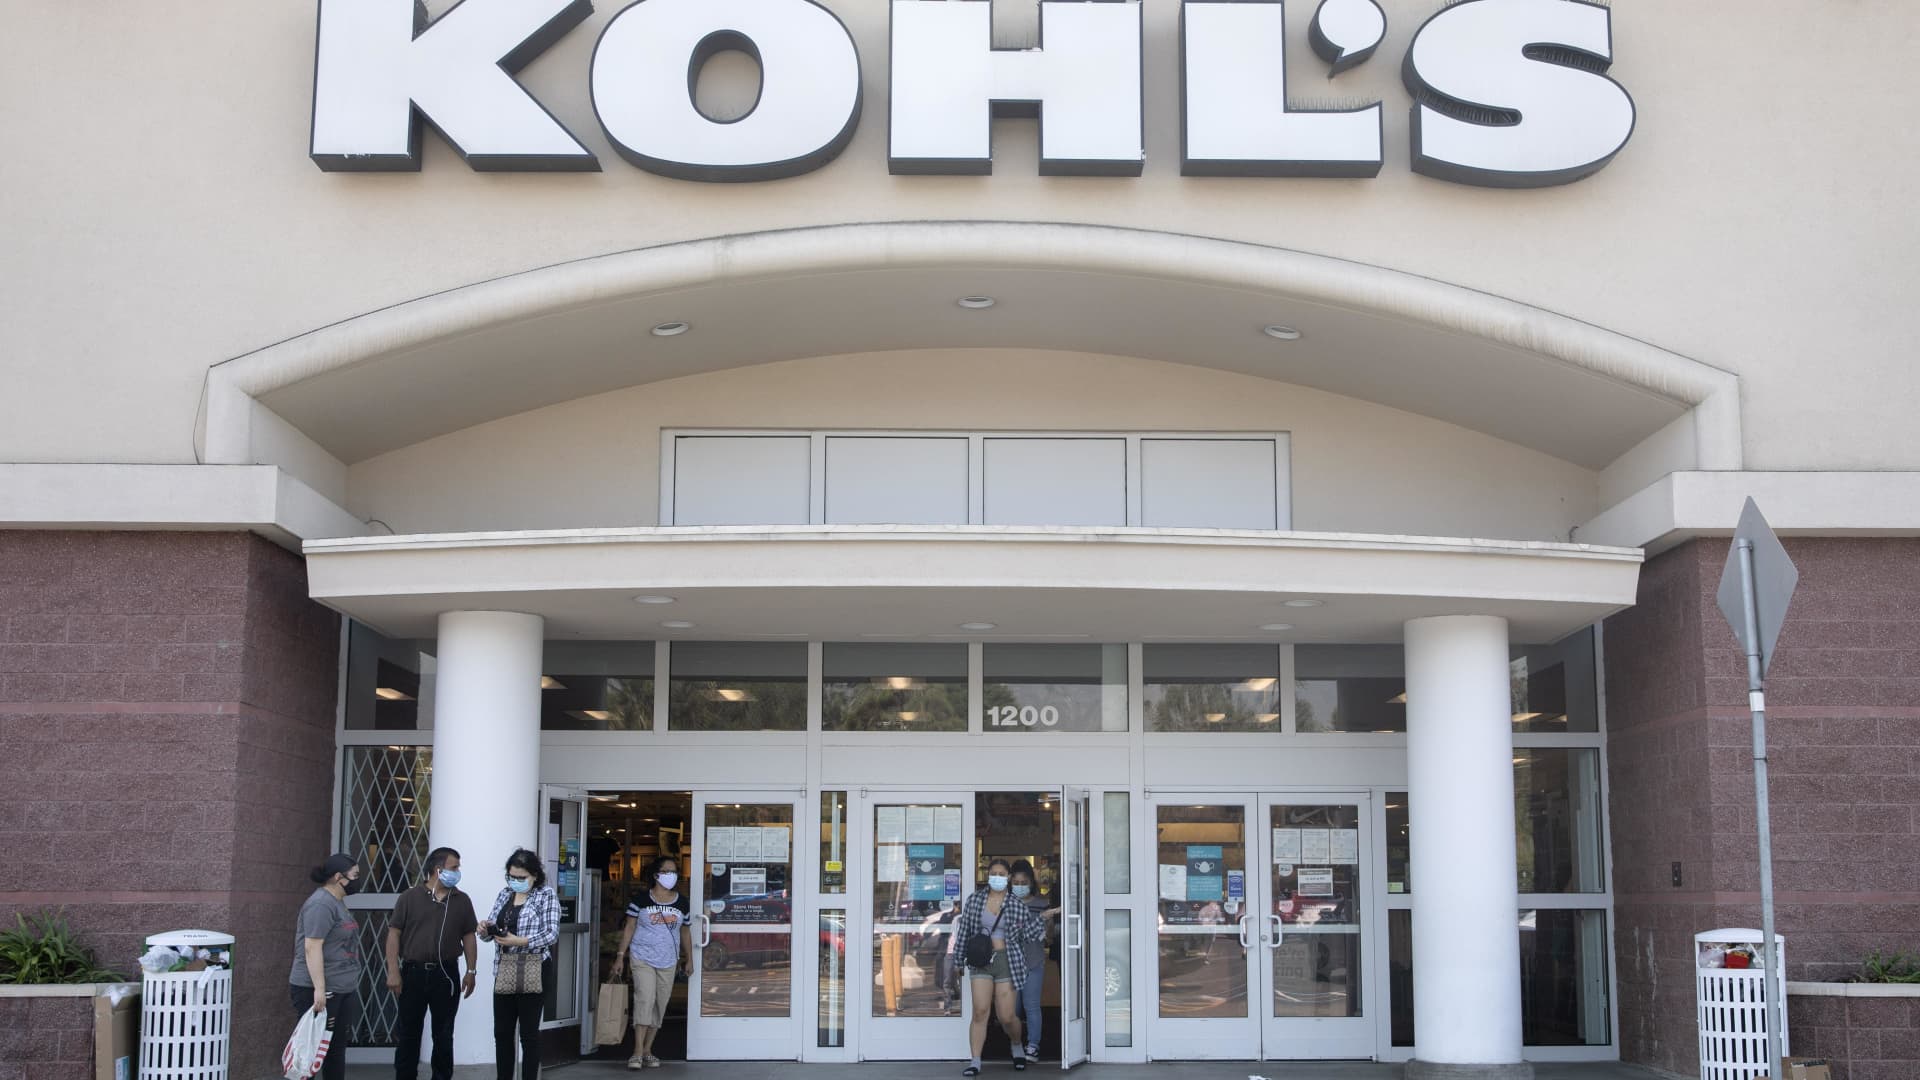 People shop at Kohl's department store amid the coronavirus outbreak on September 5, 2020 in San Francisco, California.